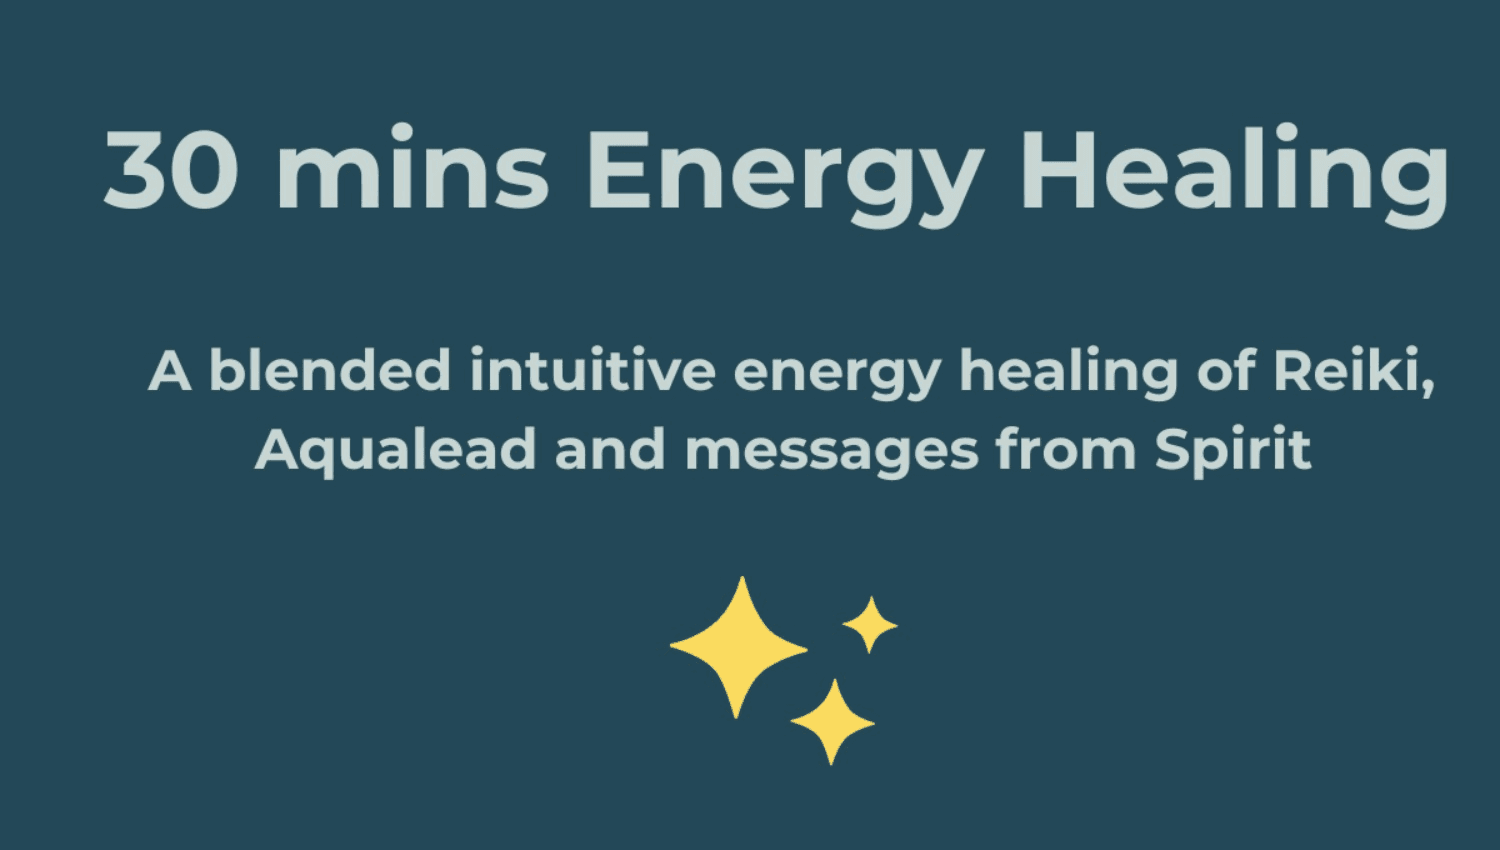 Image for Intuitive Energy Healing - 30 mins